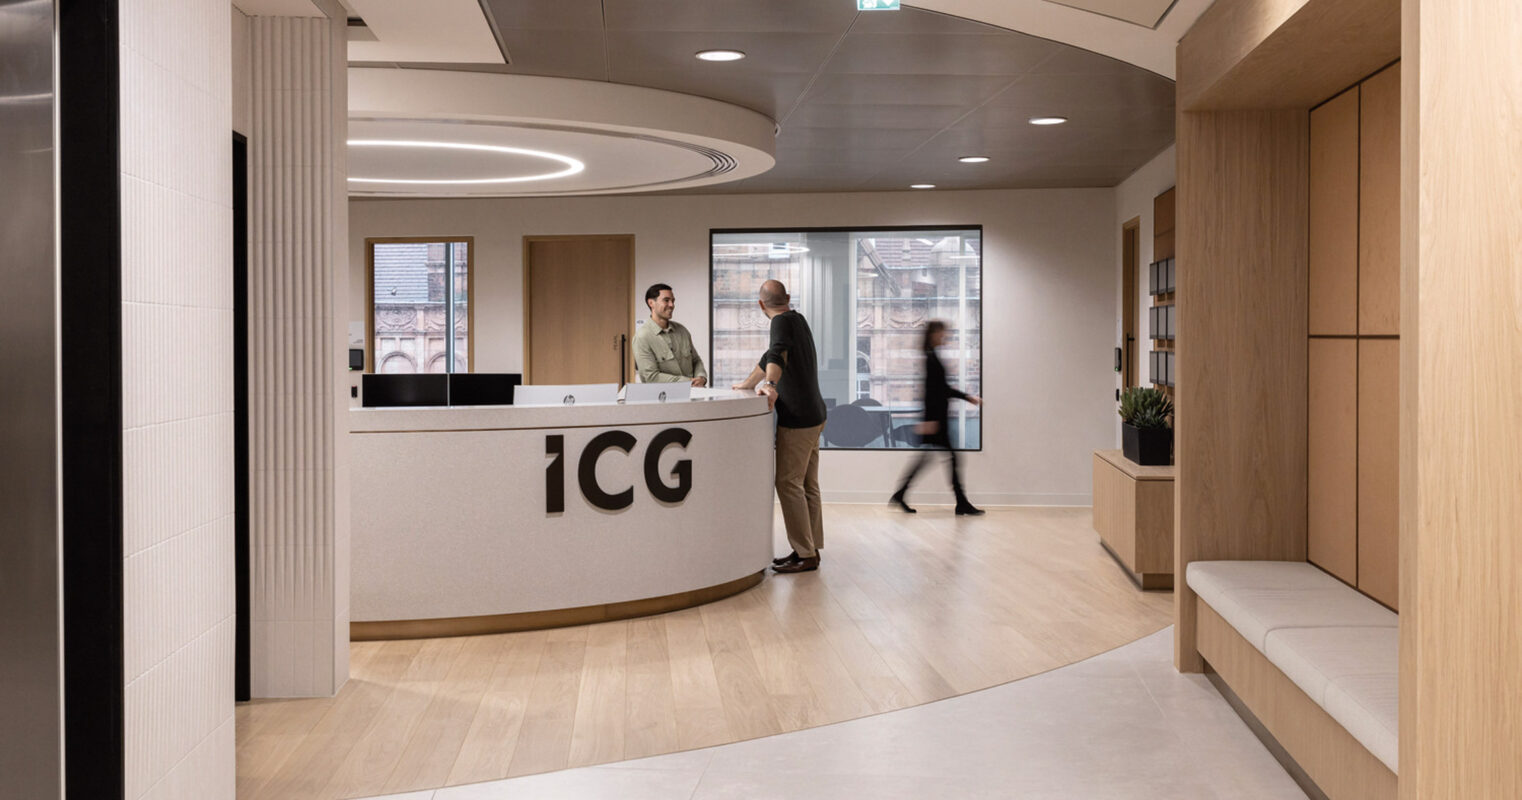 Modern office reception with a sleek, curved desk emblazoned with 'ICG' logo, flanked by warm wood paneling and ambient lighting; visitors converse nearby, clearly navigating a space designed for both function and aesthetics.